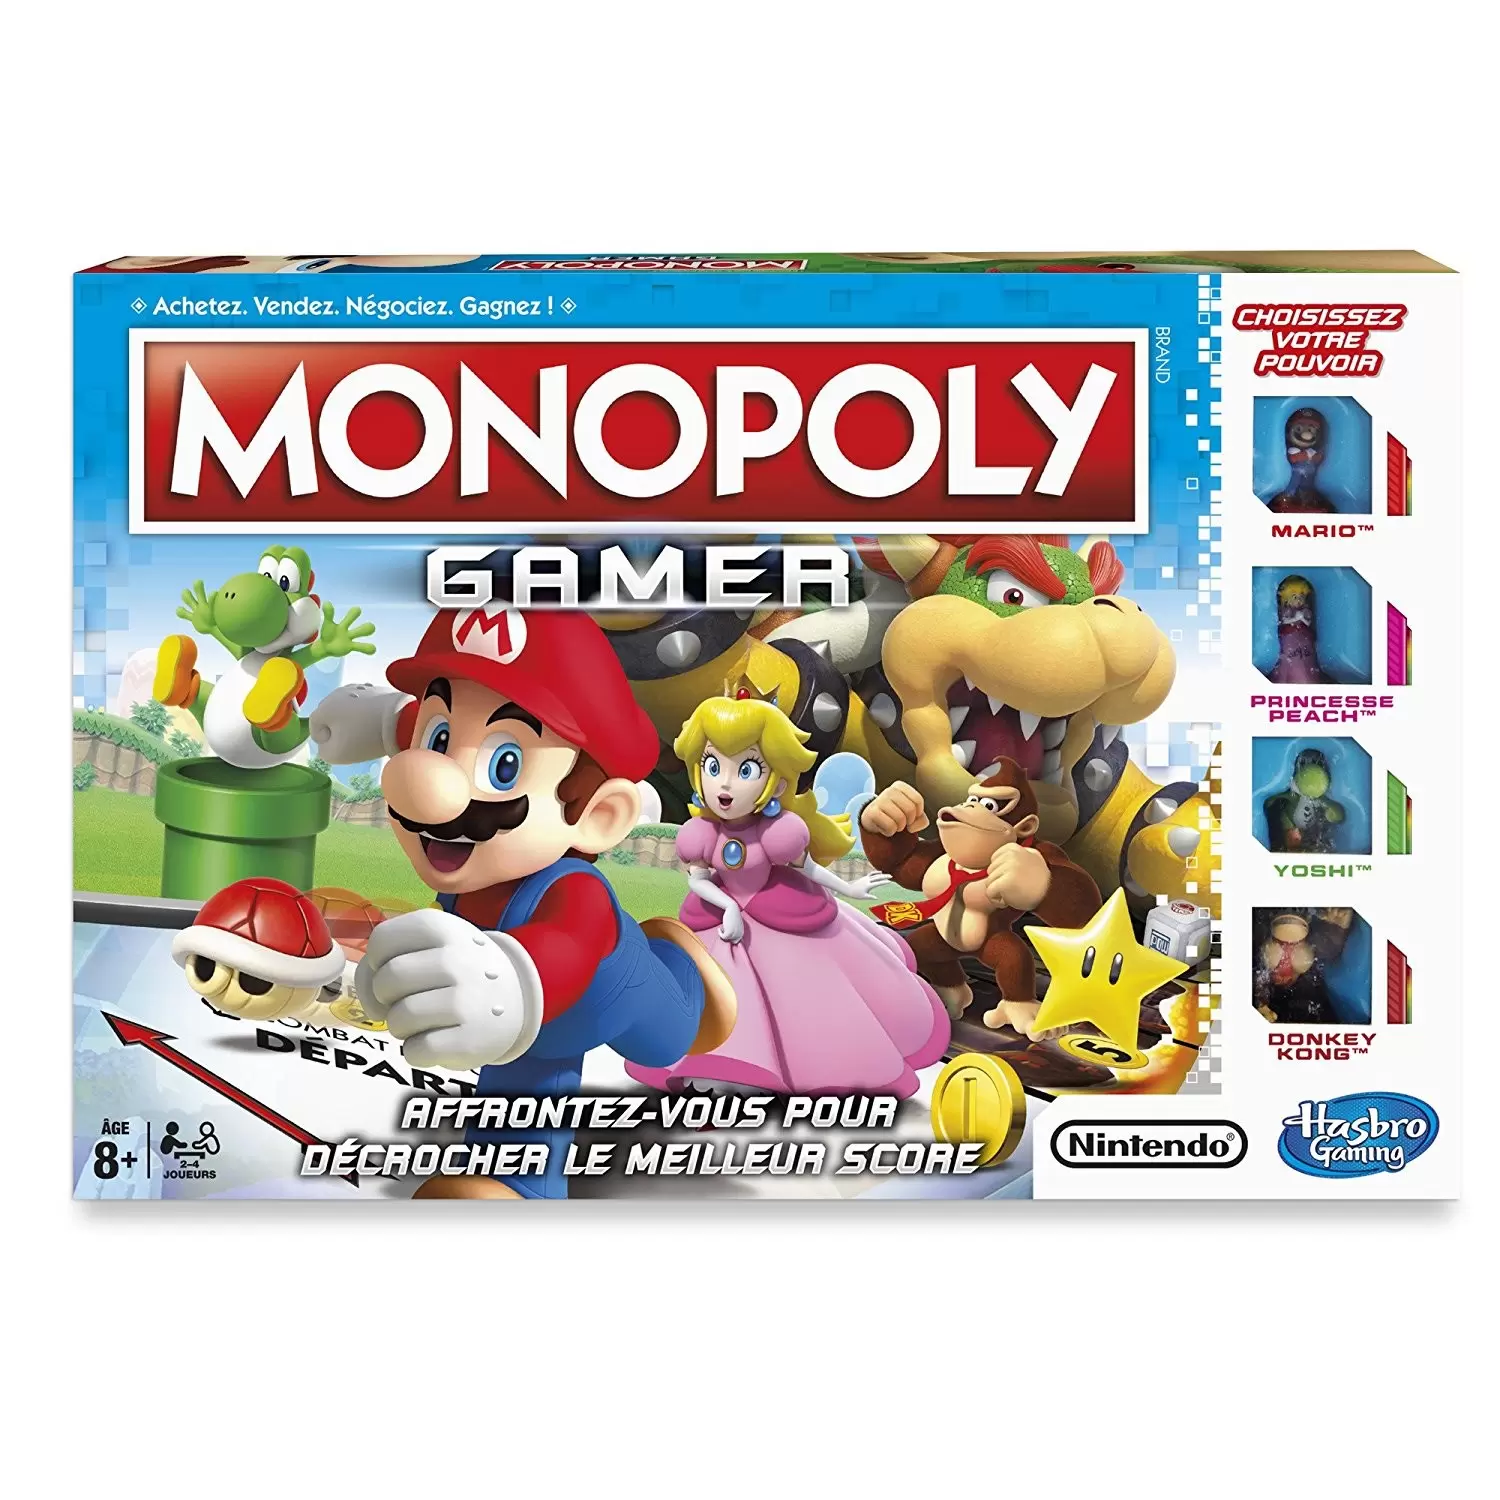 Monopoly Video Games - Monopoly Gamer